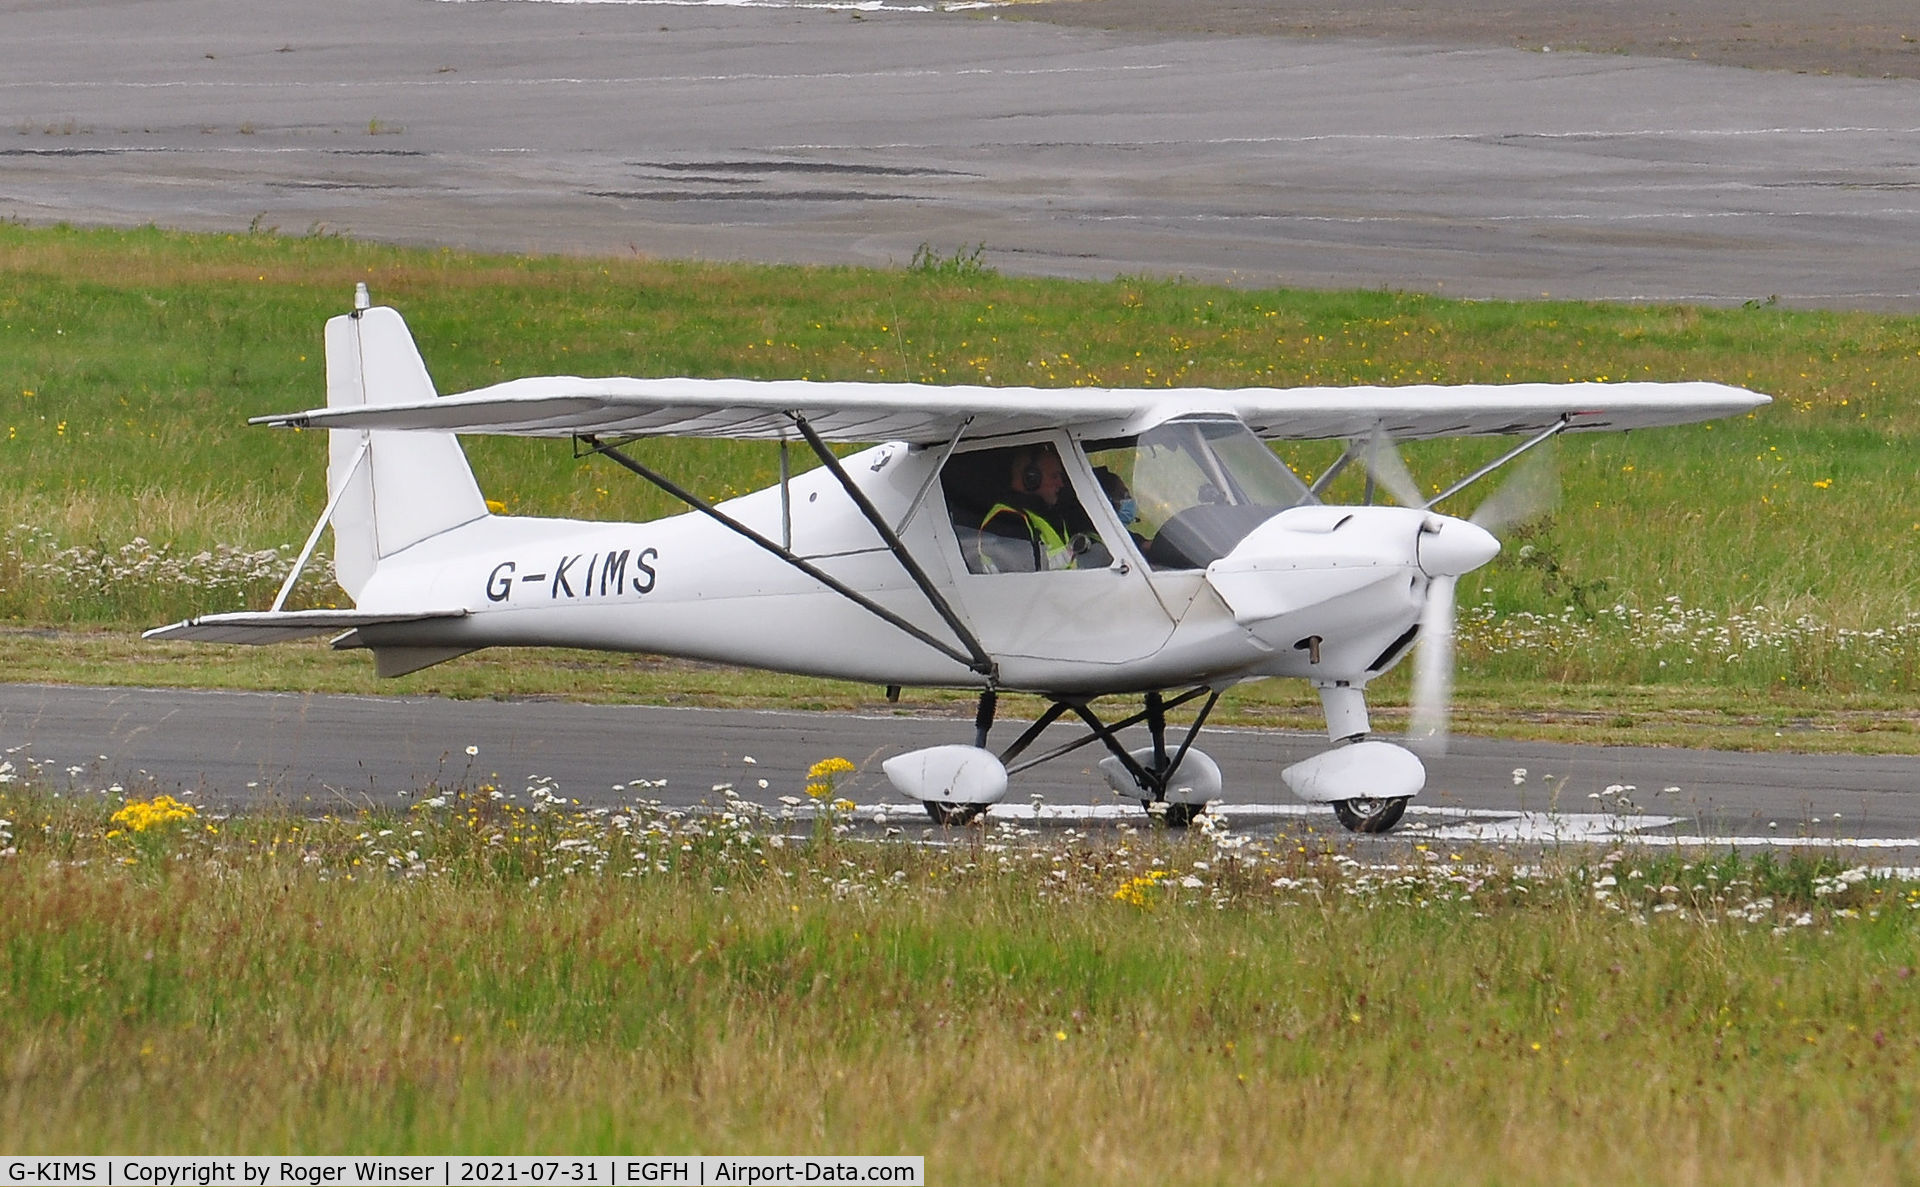 G-KIMS, 2017 Comco Ikarus C42 FB100 C/N 1704-7497, Resident Ikarus operated by Gower Flight Centre.